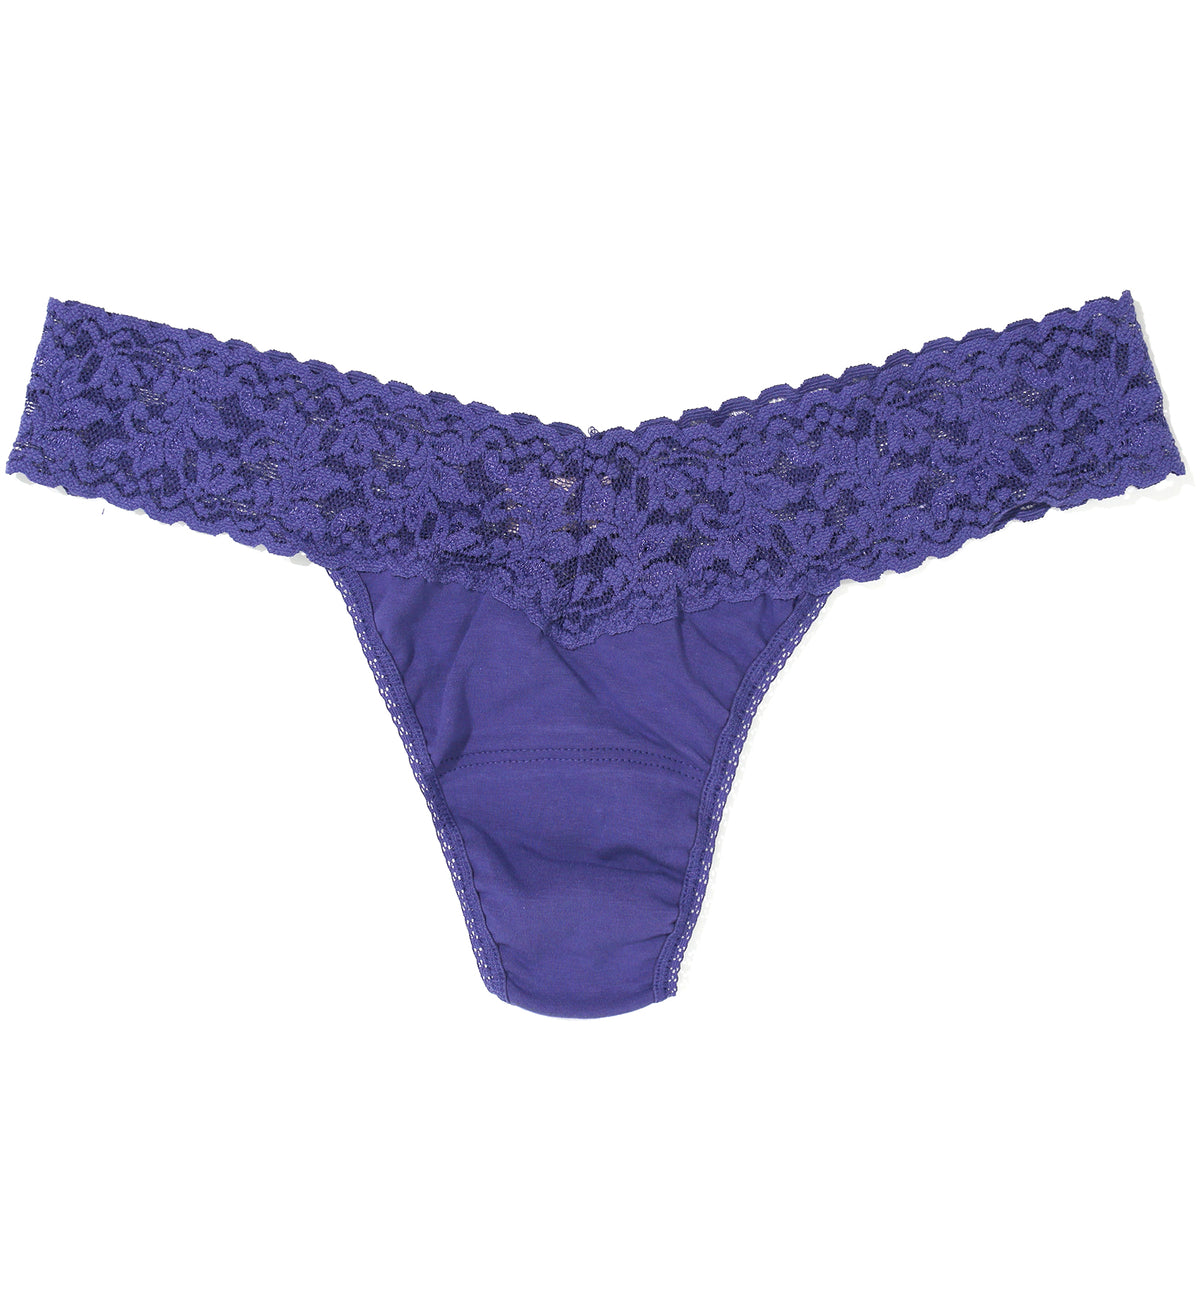 Hanky Panky Cotton Low Rise Thong (891581P),Folk Song - Folk Song,One Size